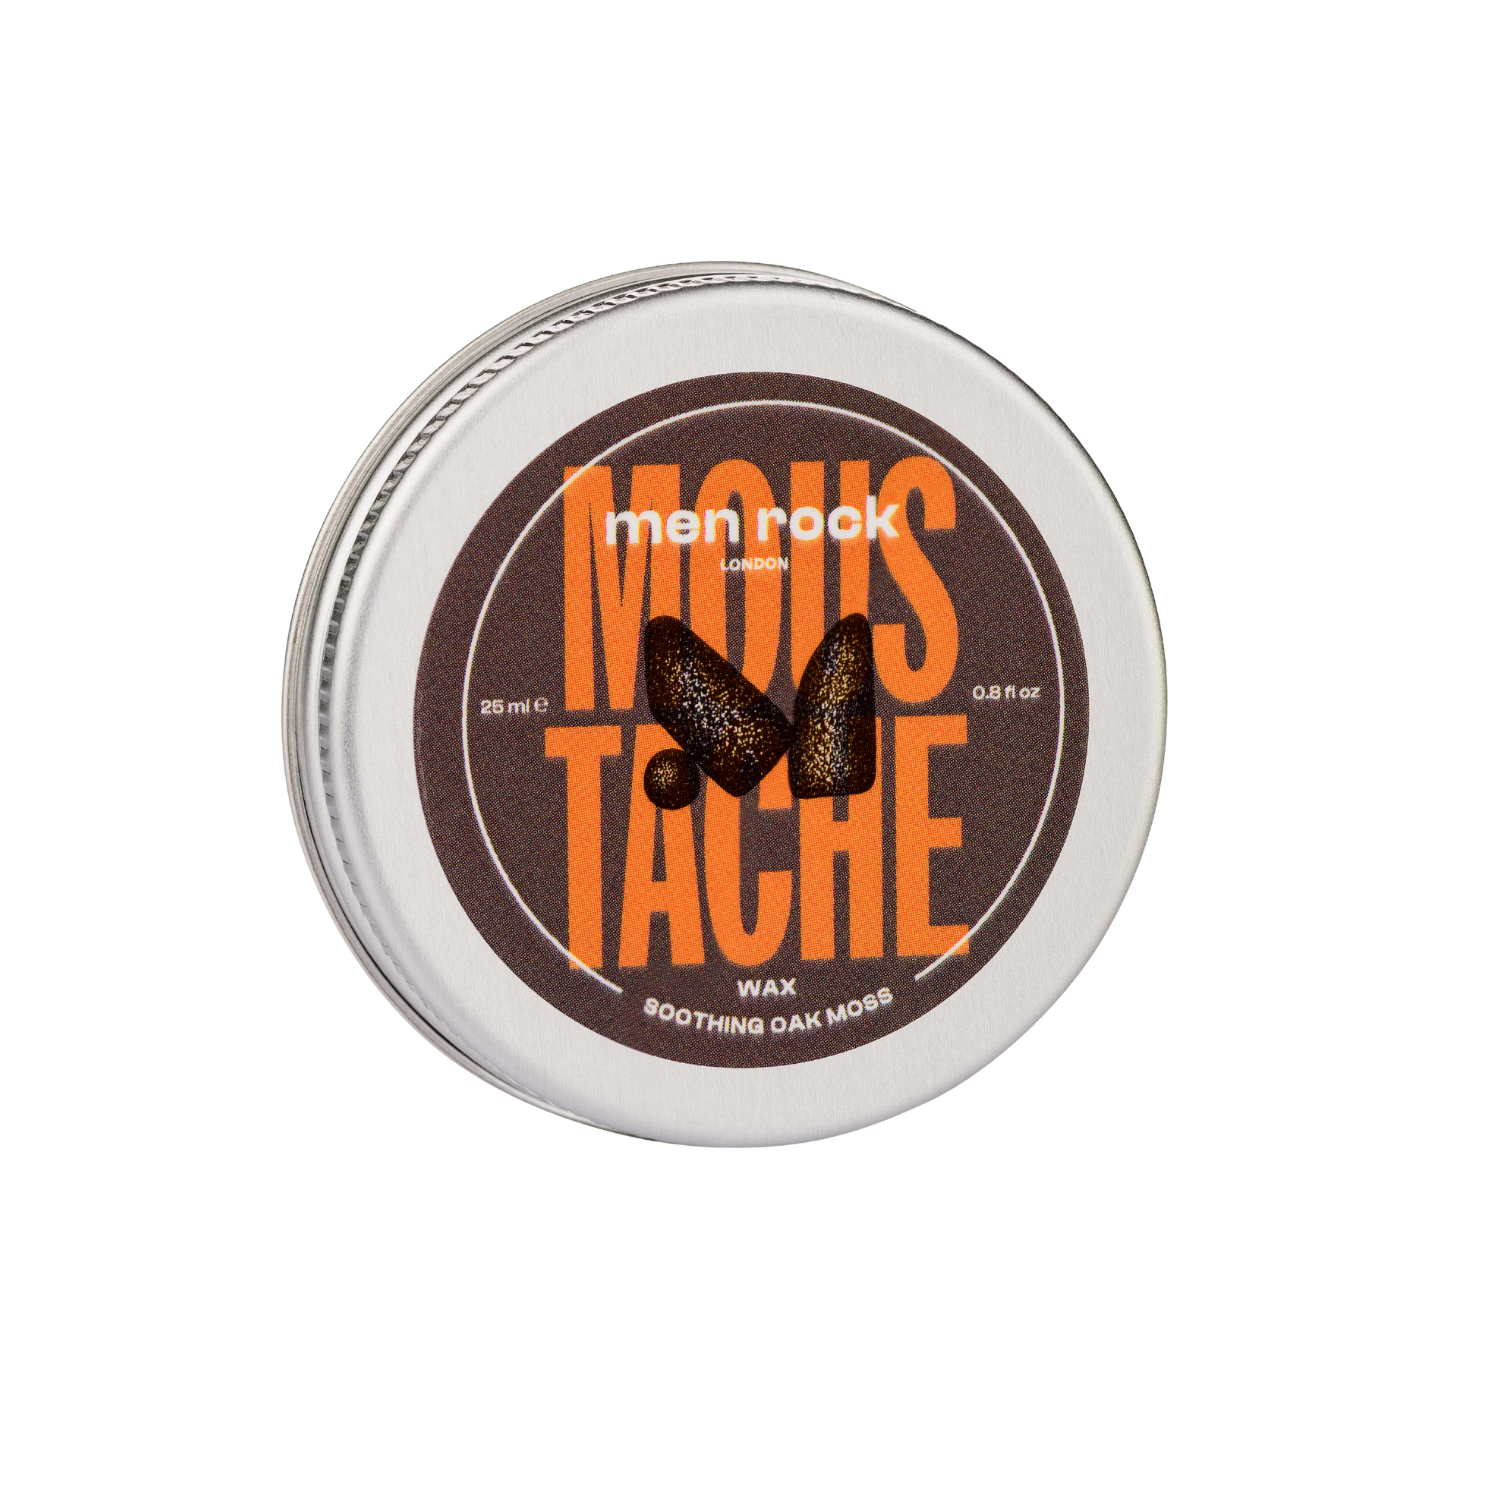 Moustache wax infused with Oak Moss scent and Argan oil in a 25ml tin